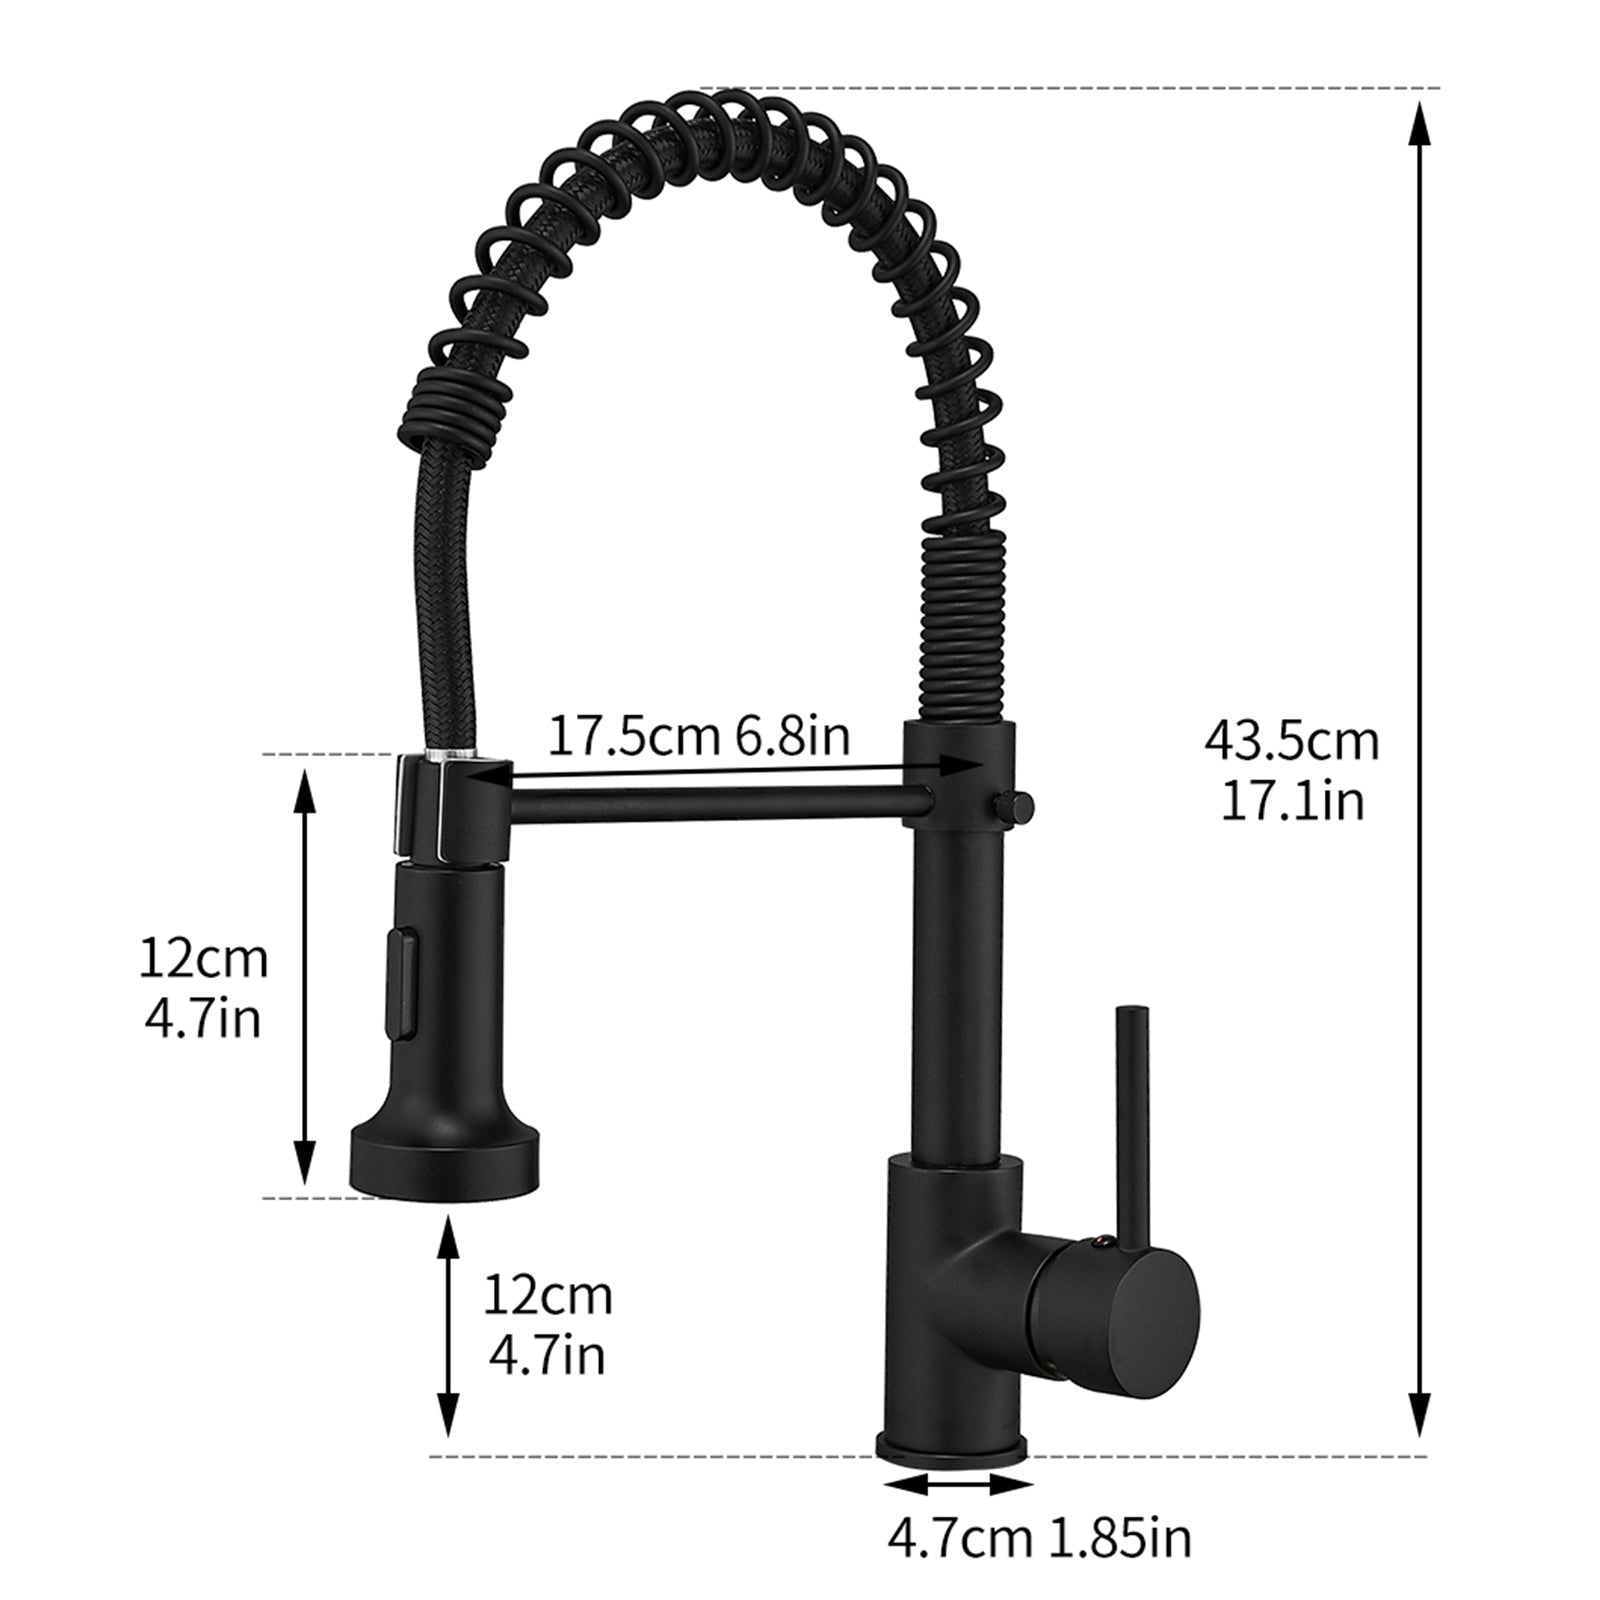 Commercial Black Kitchen Faucet With Pull Down -